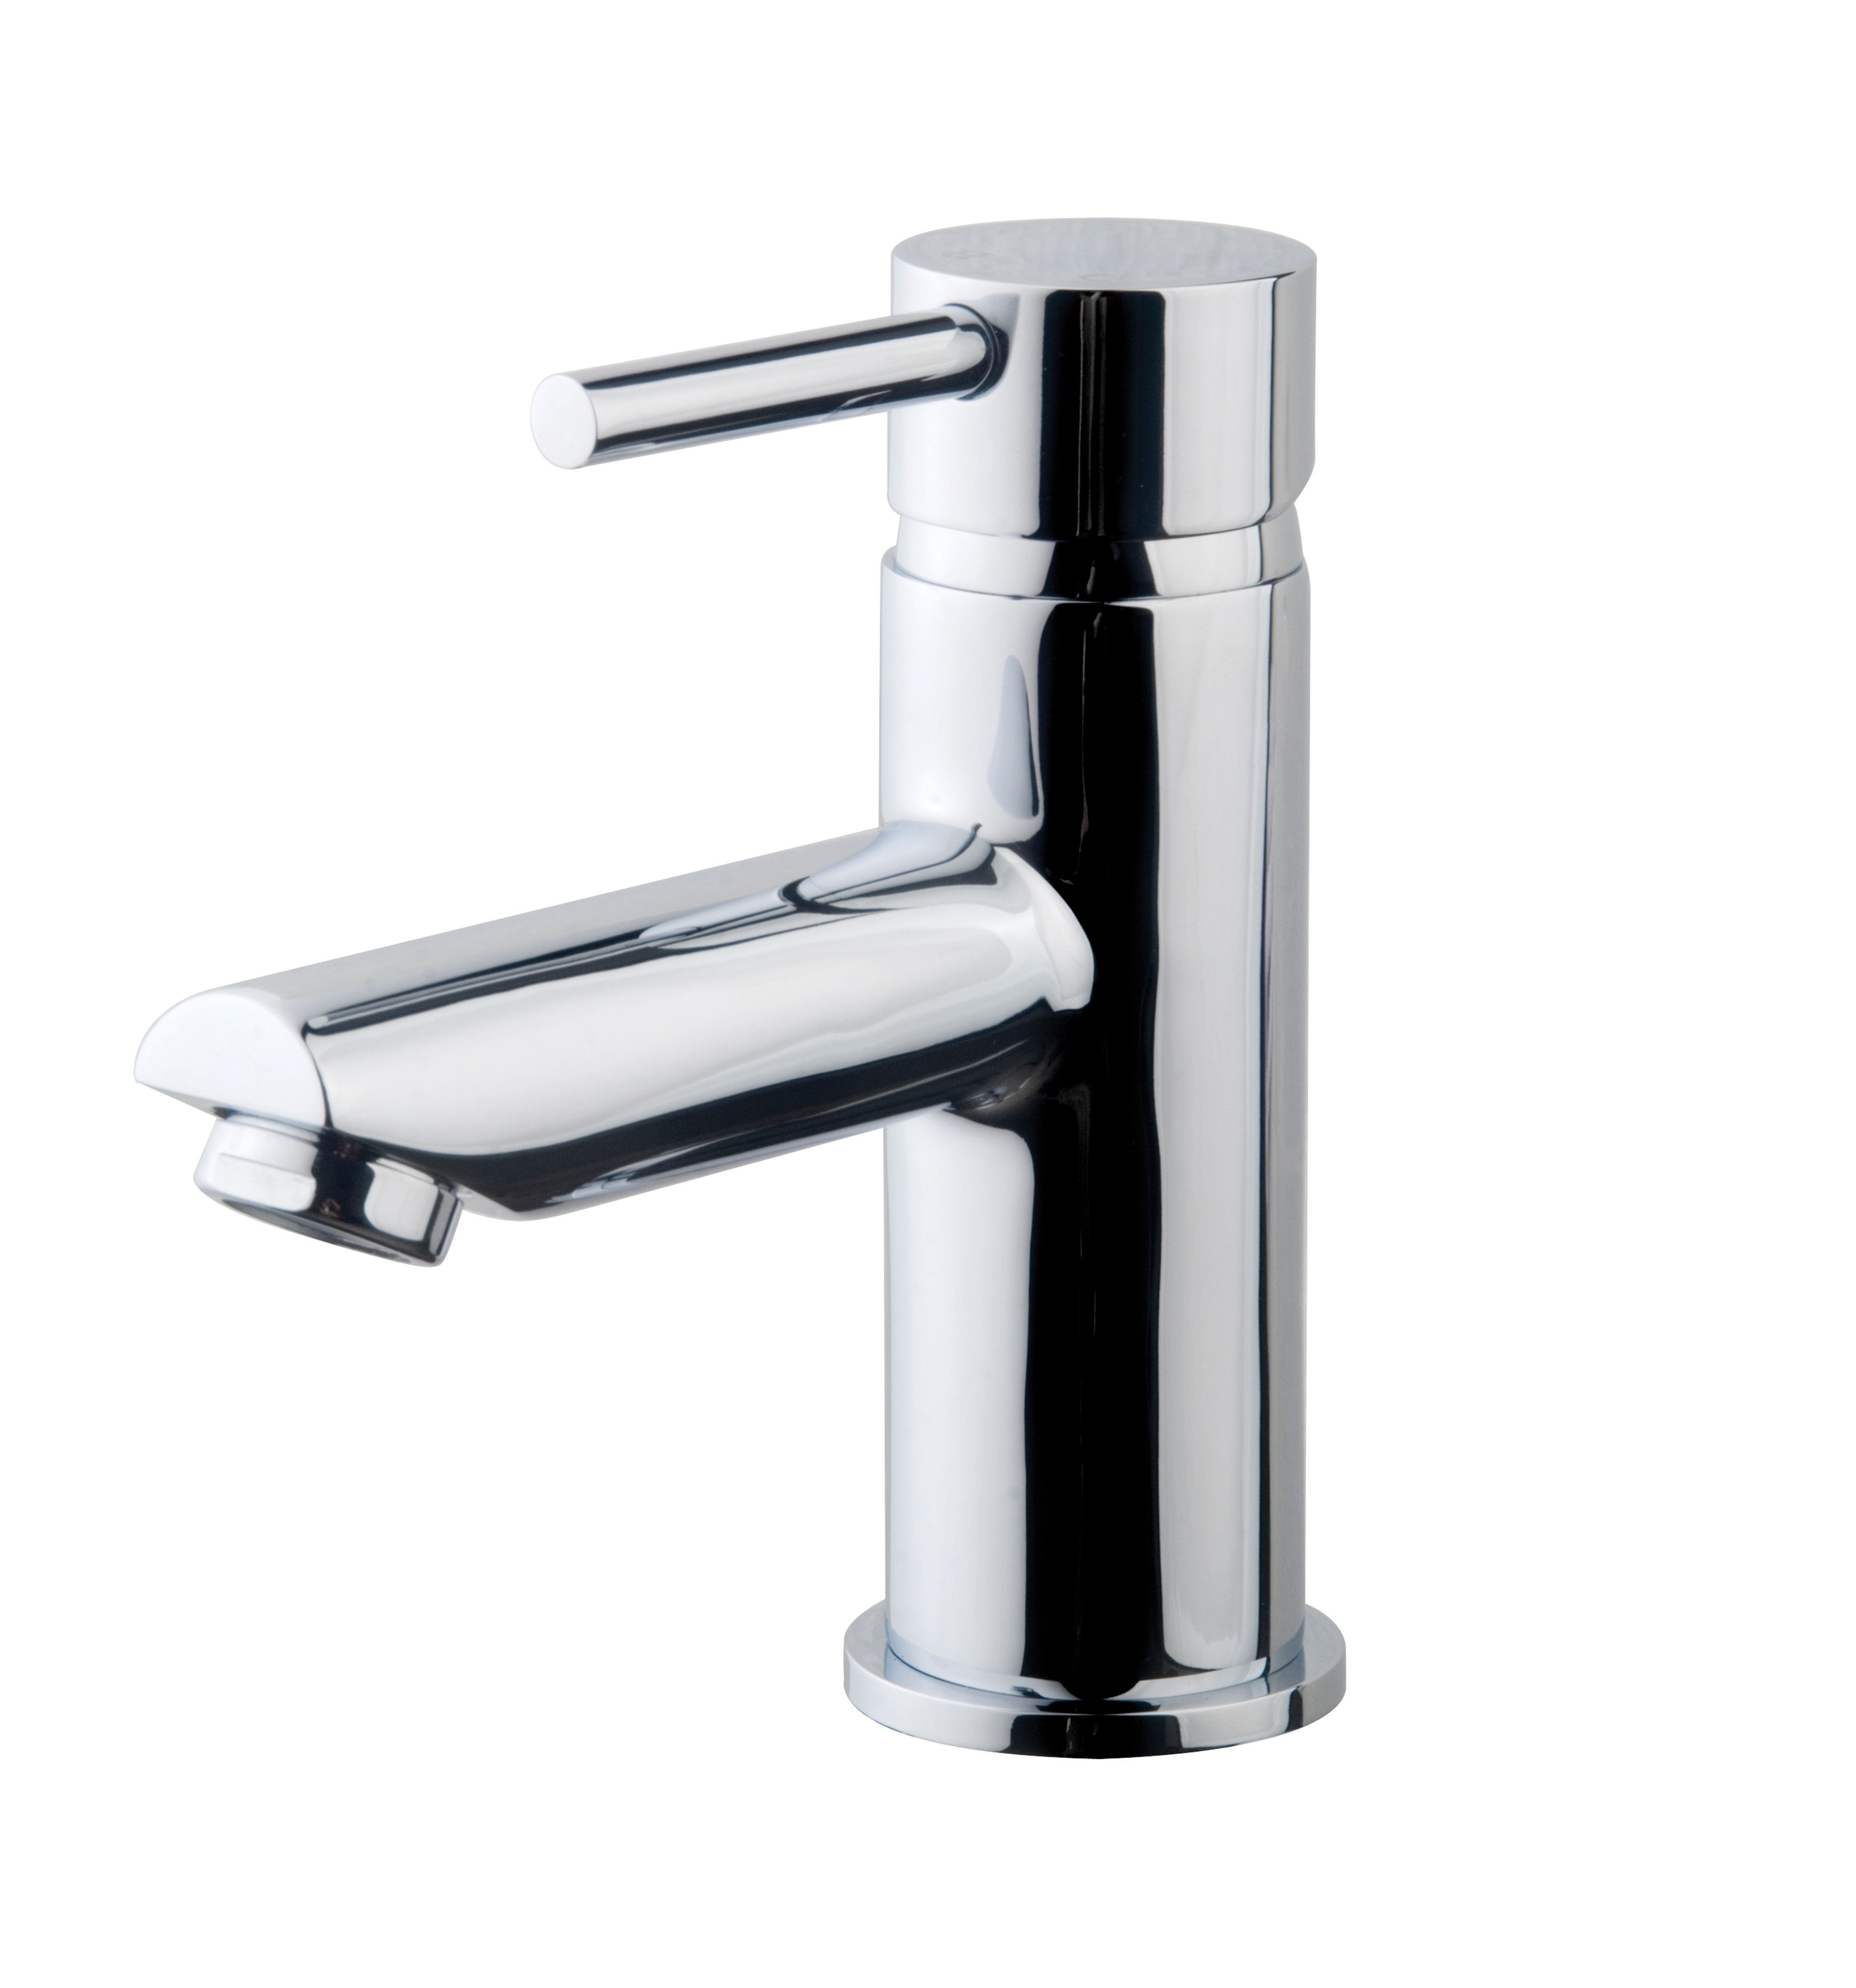 Image of Wickes Mirang Chrome Lever Basin Mixer Tap